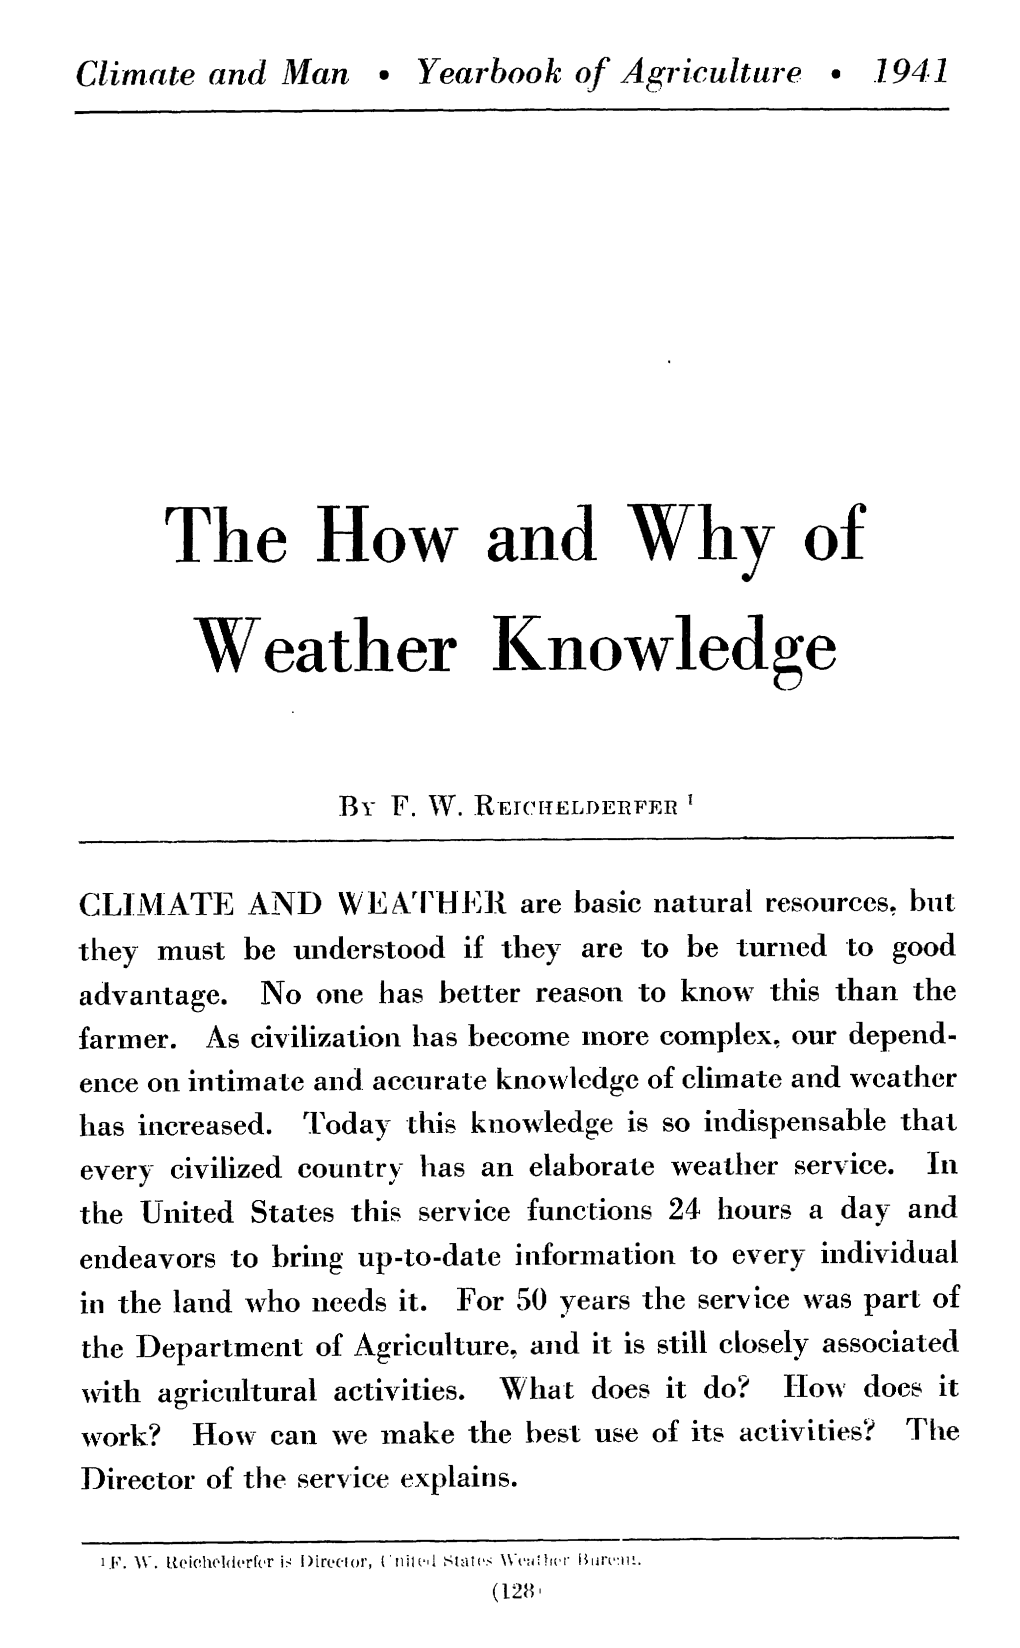 The How and Why of Weather Knowledge